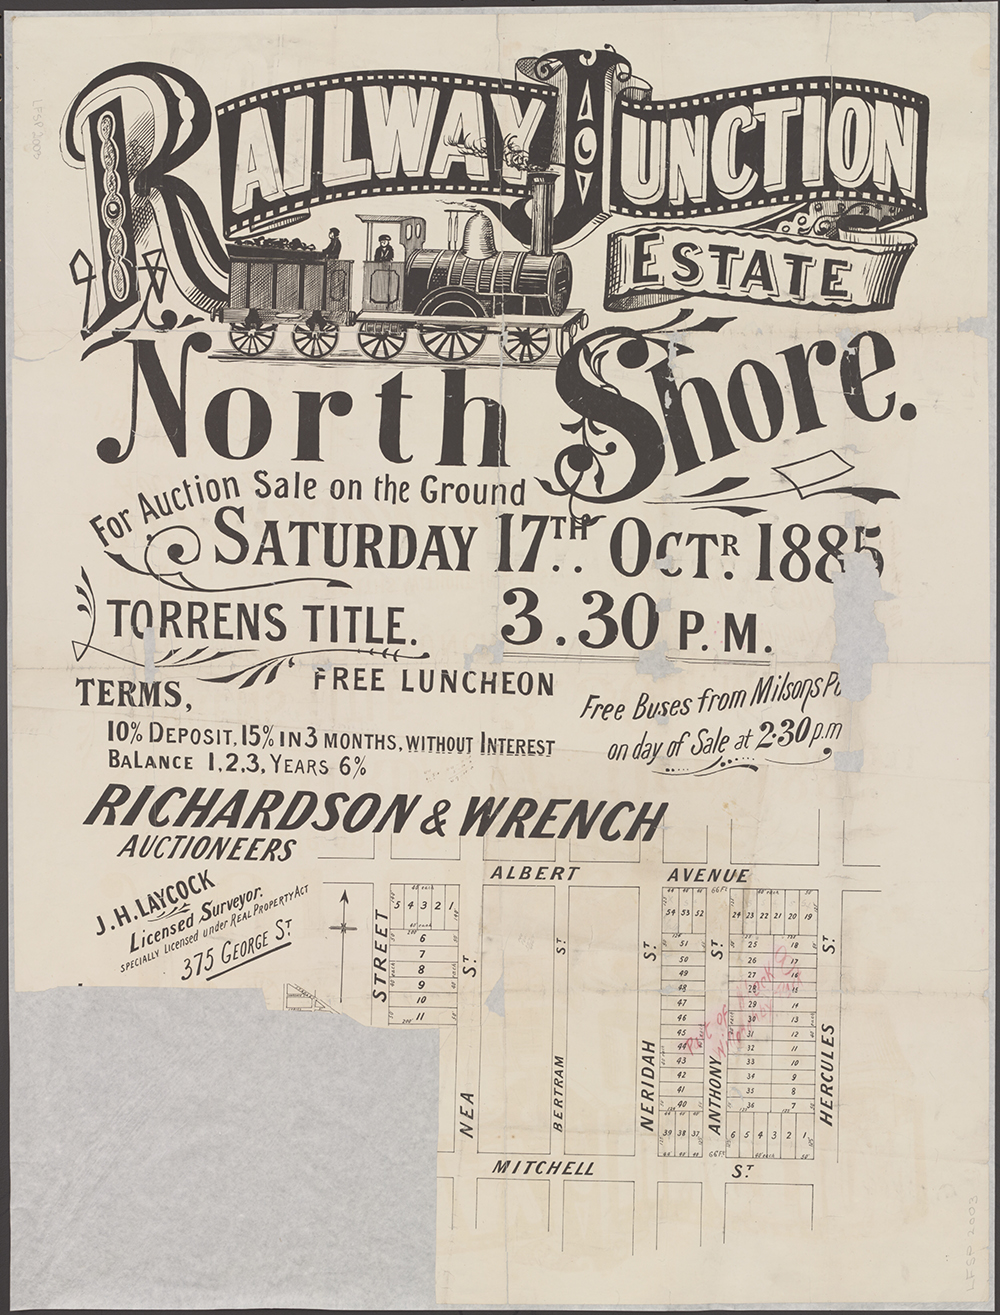 The North Shore Line The Dictionary Of Sydney 